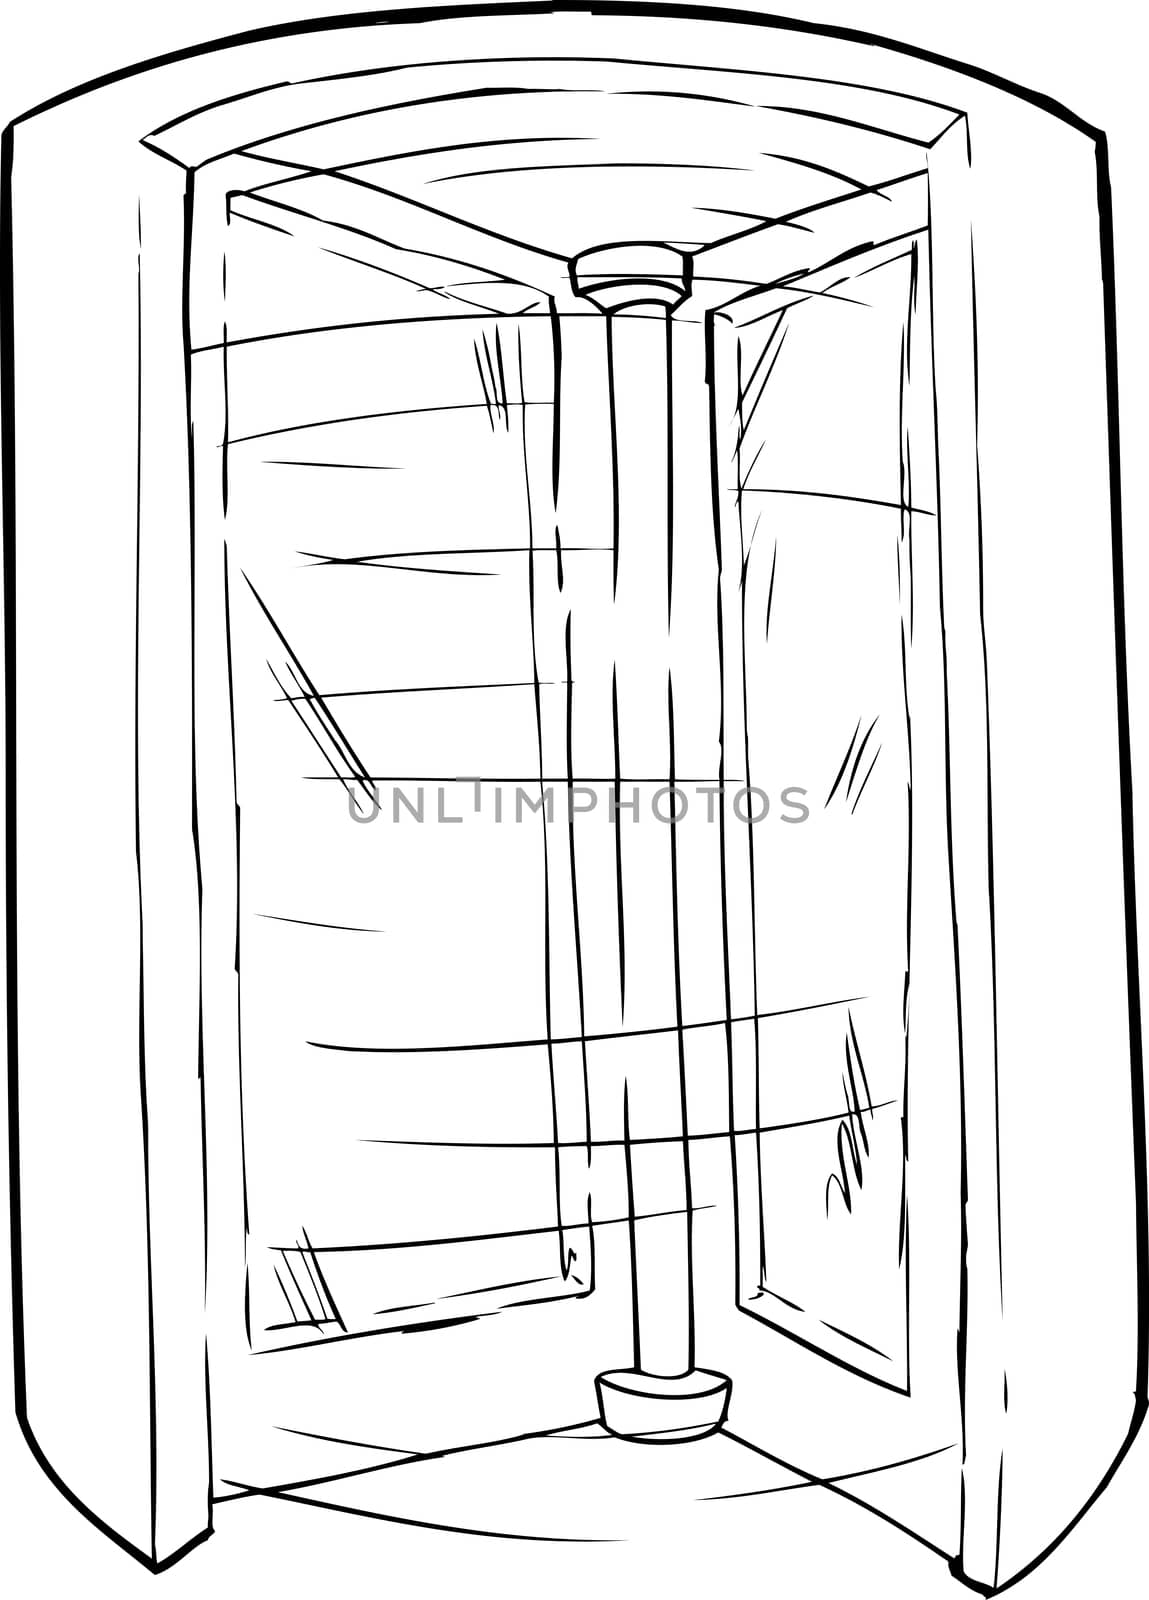 Empty Outlined Revolving Doorway by TheBlackRhino